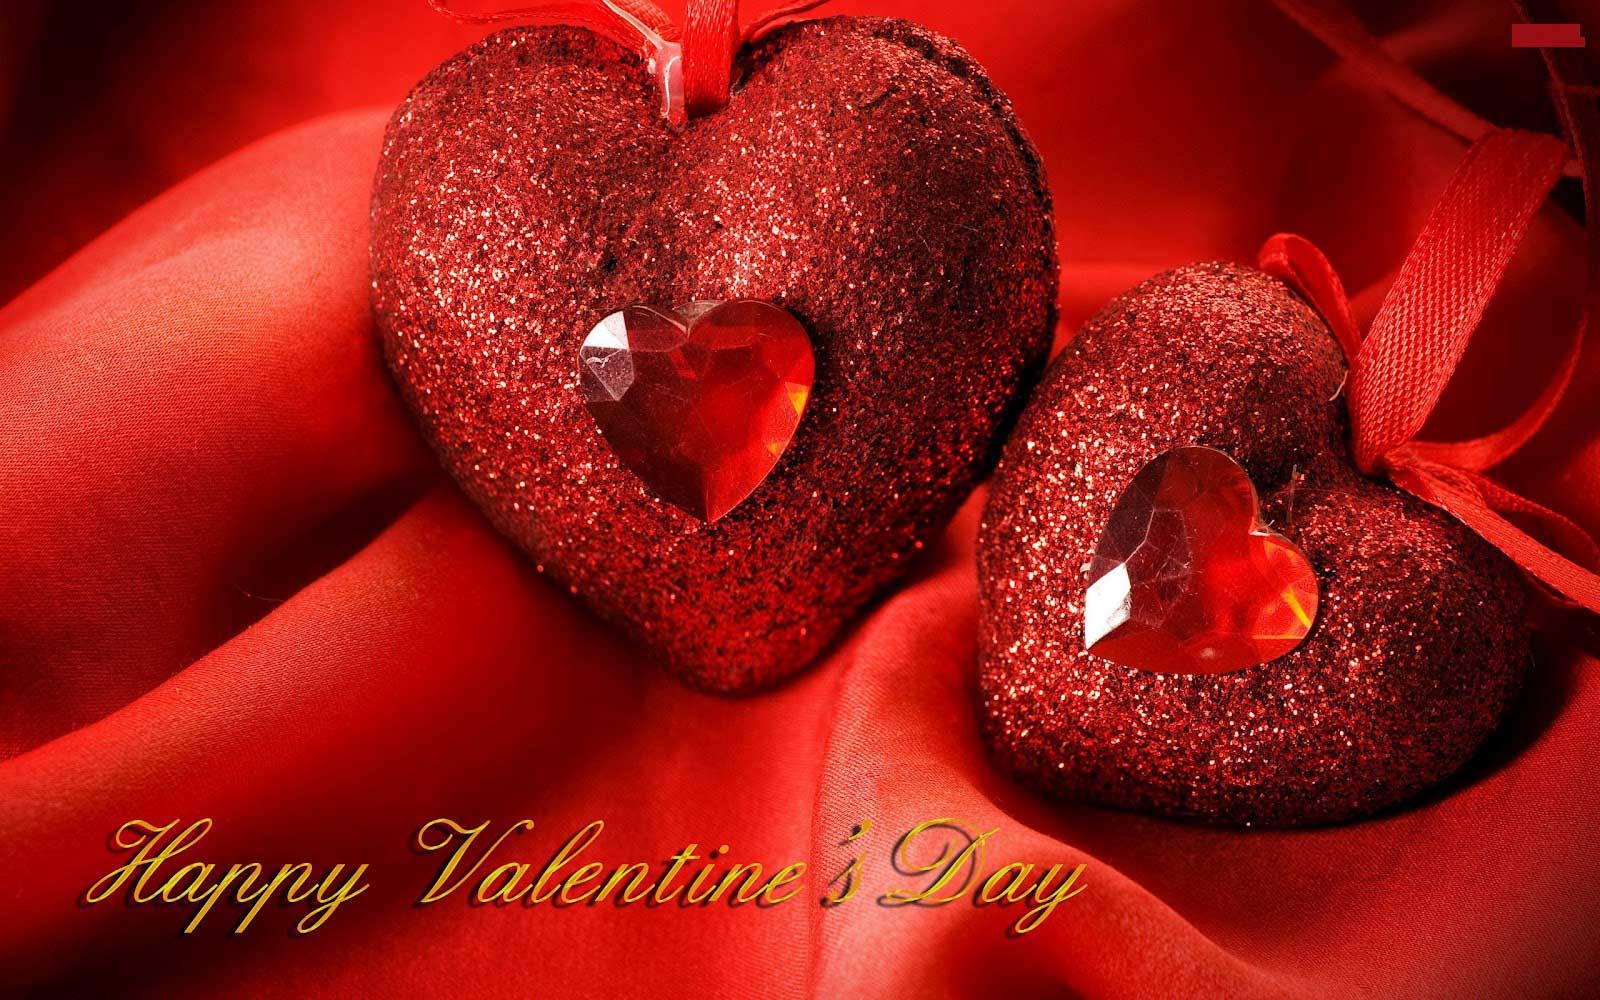 Valentines Day Image 2021 and HD Wallpaper